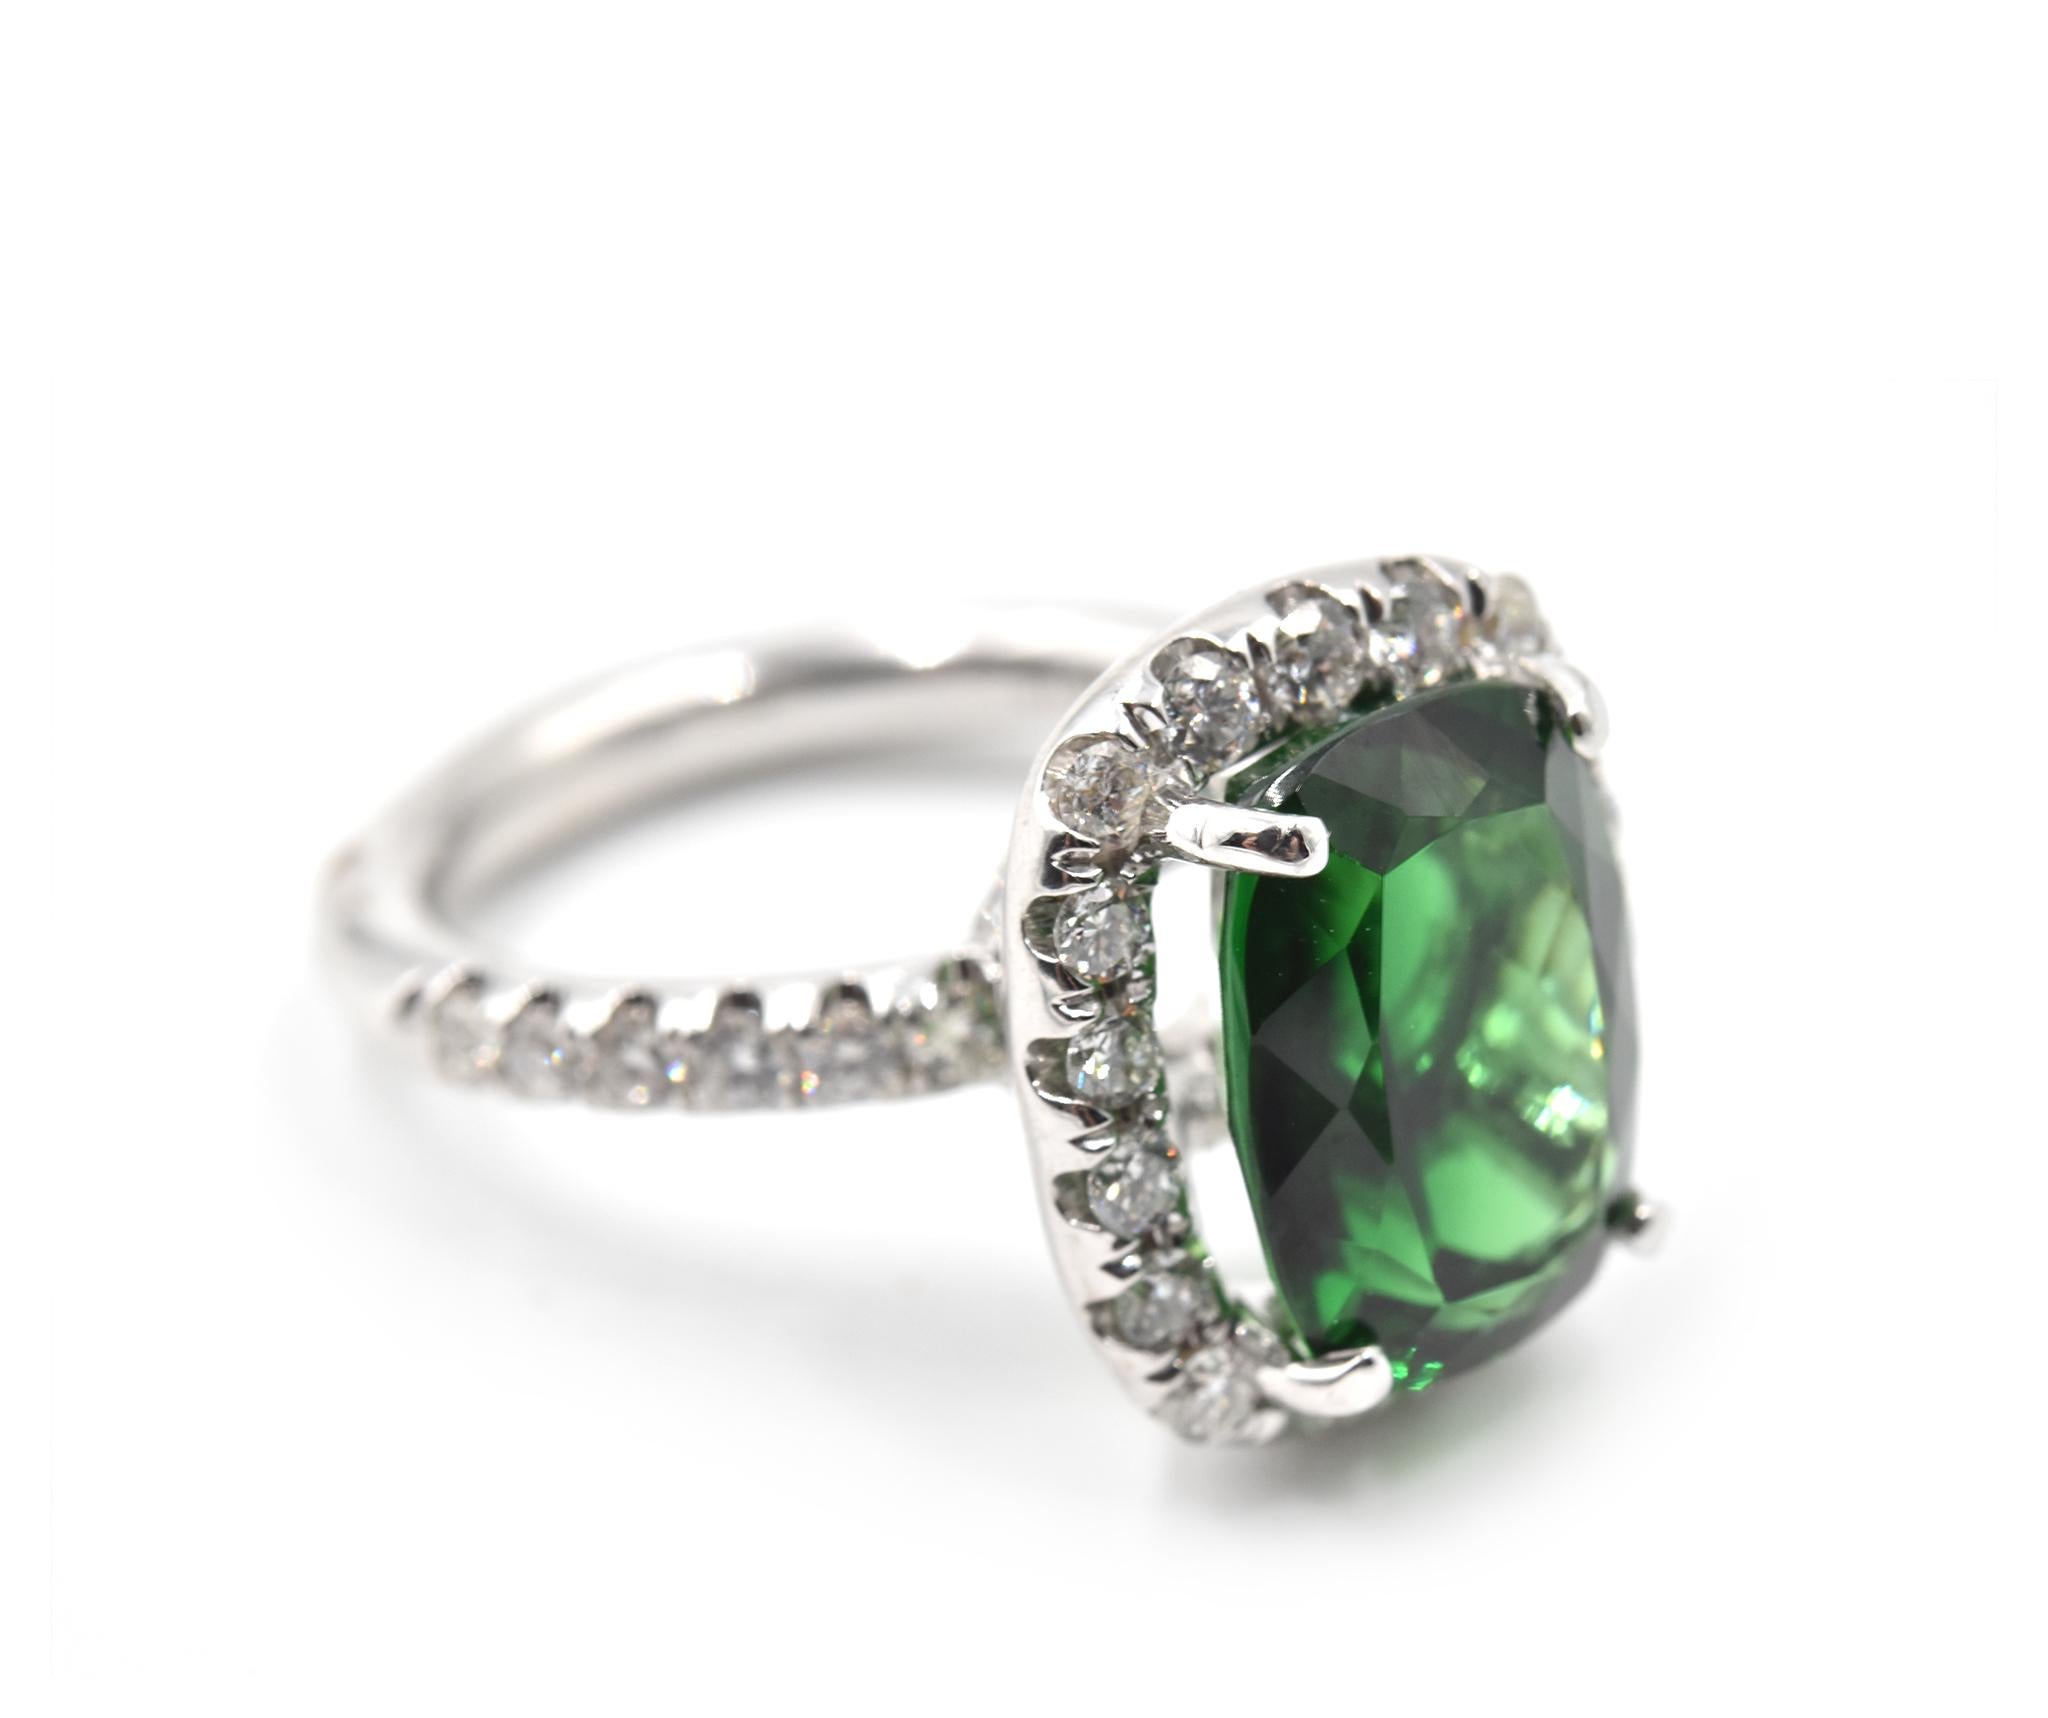 Designer: custom design
Material: 18k white gold
Chrome Tourmaline: one oval cut 5.25 carat
Diamonds: 50 round brilliant cut = 1.09 carat weight
Color: G
Clarity: VS
Ring Size: 6 1/4 (please allow two additional shipping days for sizing